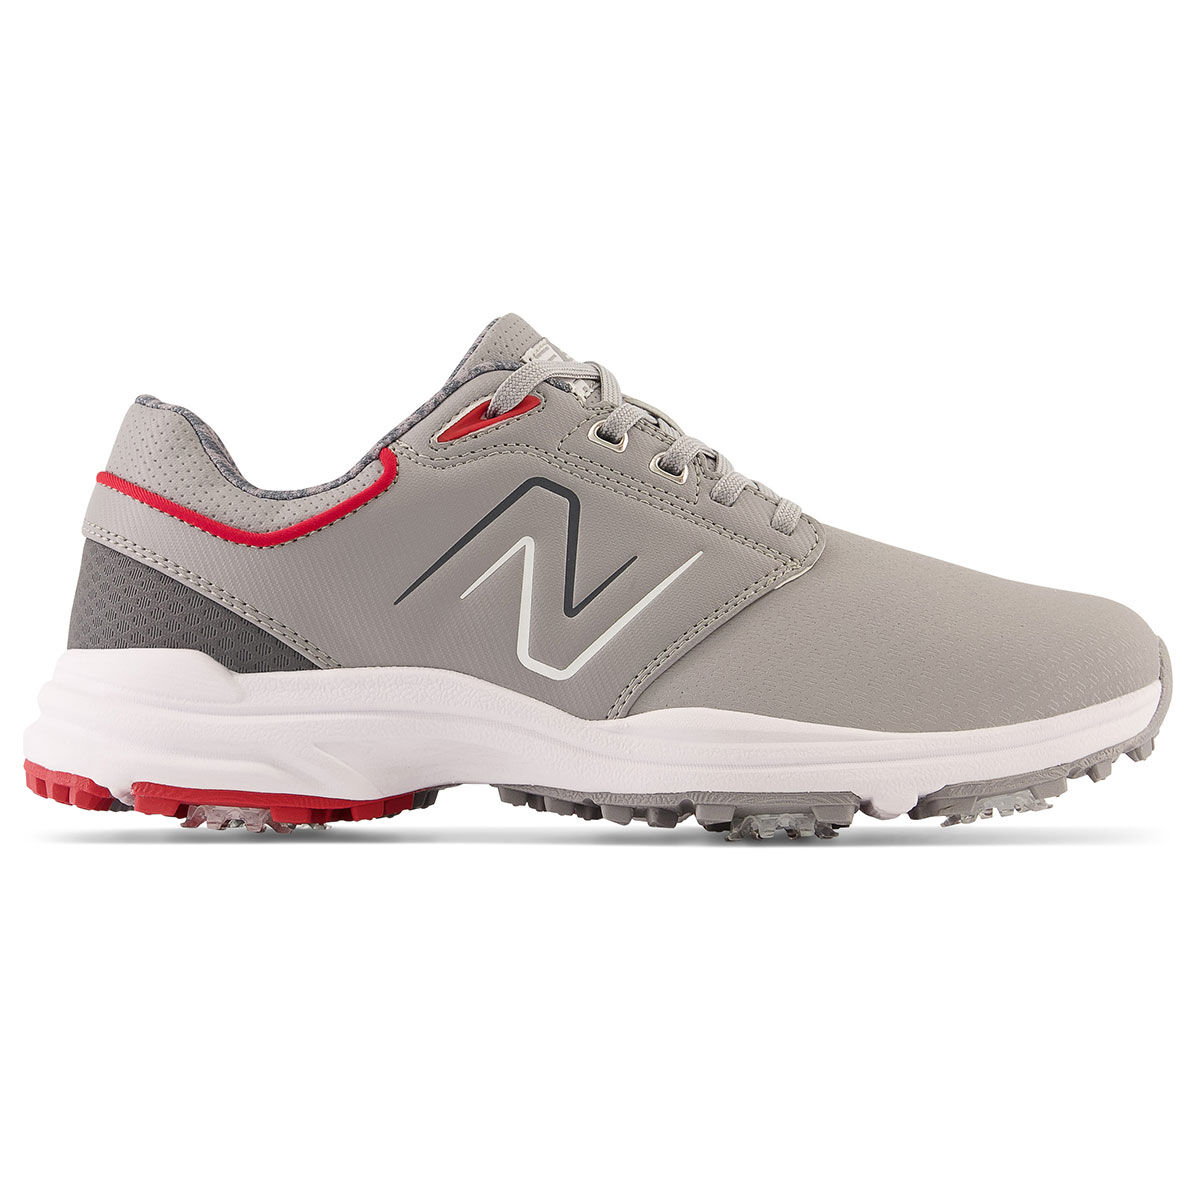 New Balance Men’s Grey Waterproof Brighton Spiked Golf Shoes, Size: 10.5 | American Golf